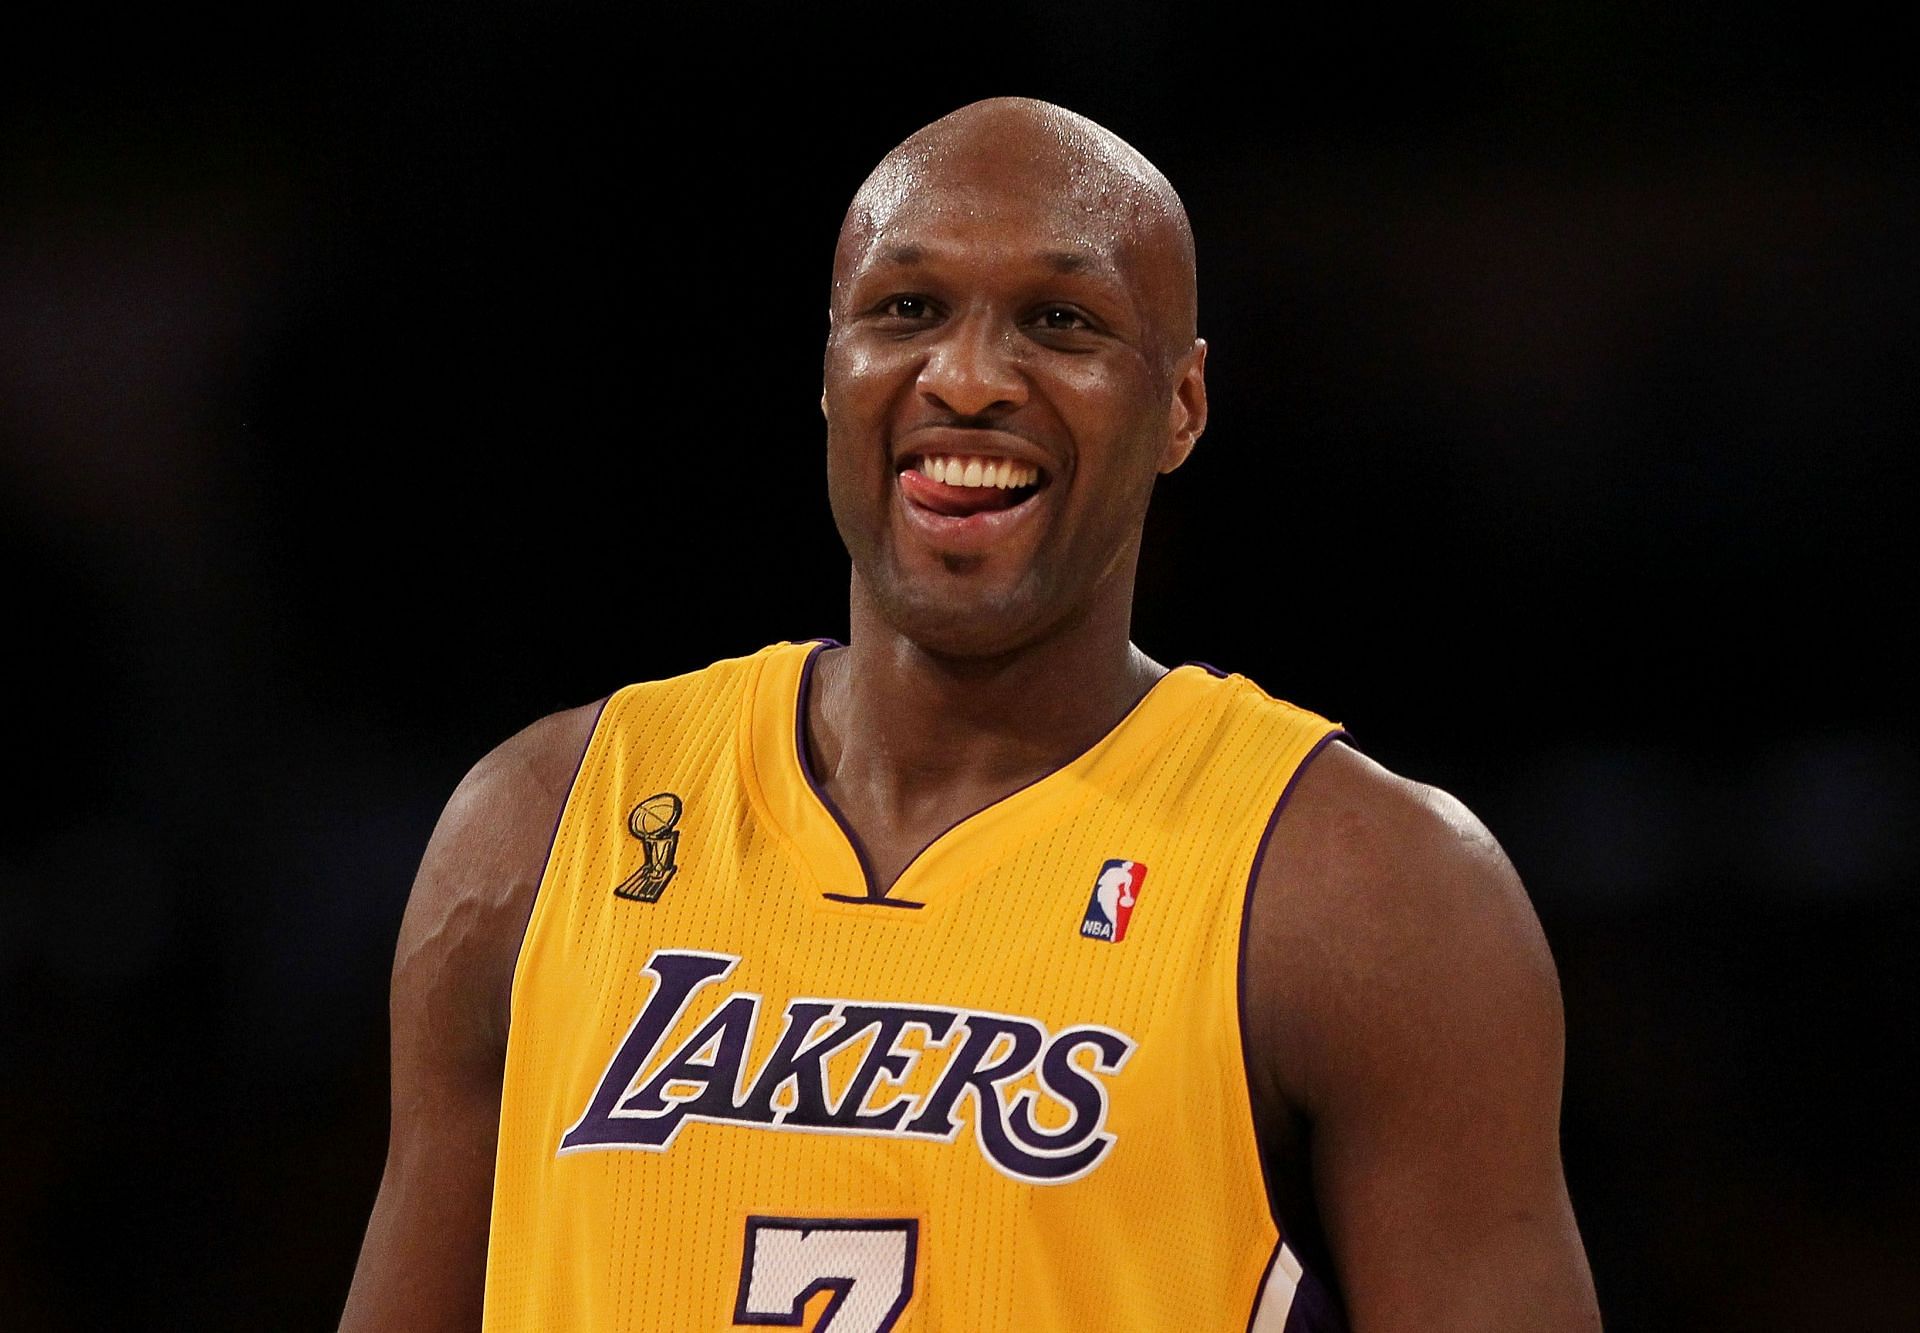 Lamar Odom during his time with the LA Lakers